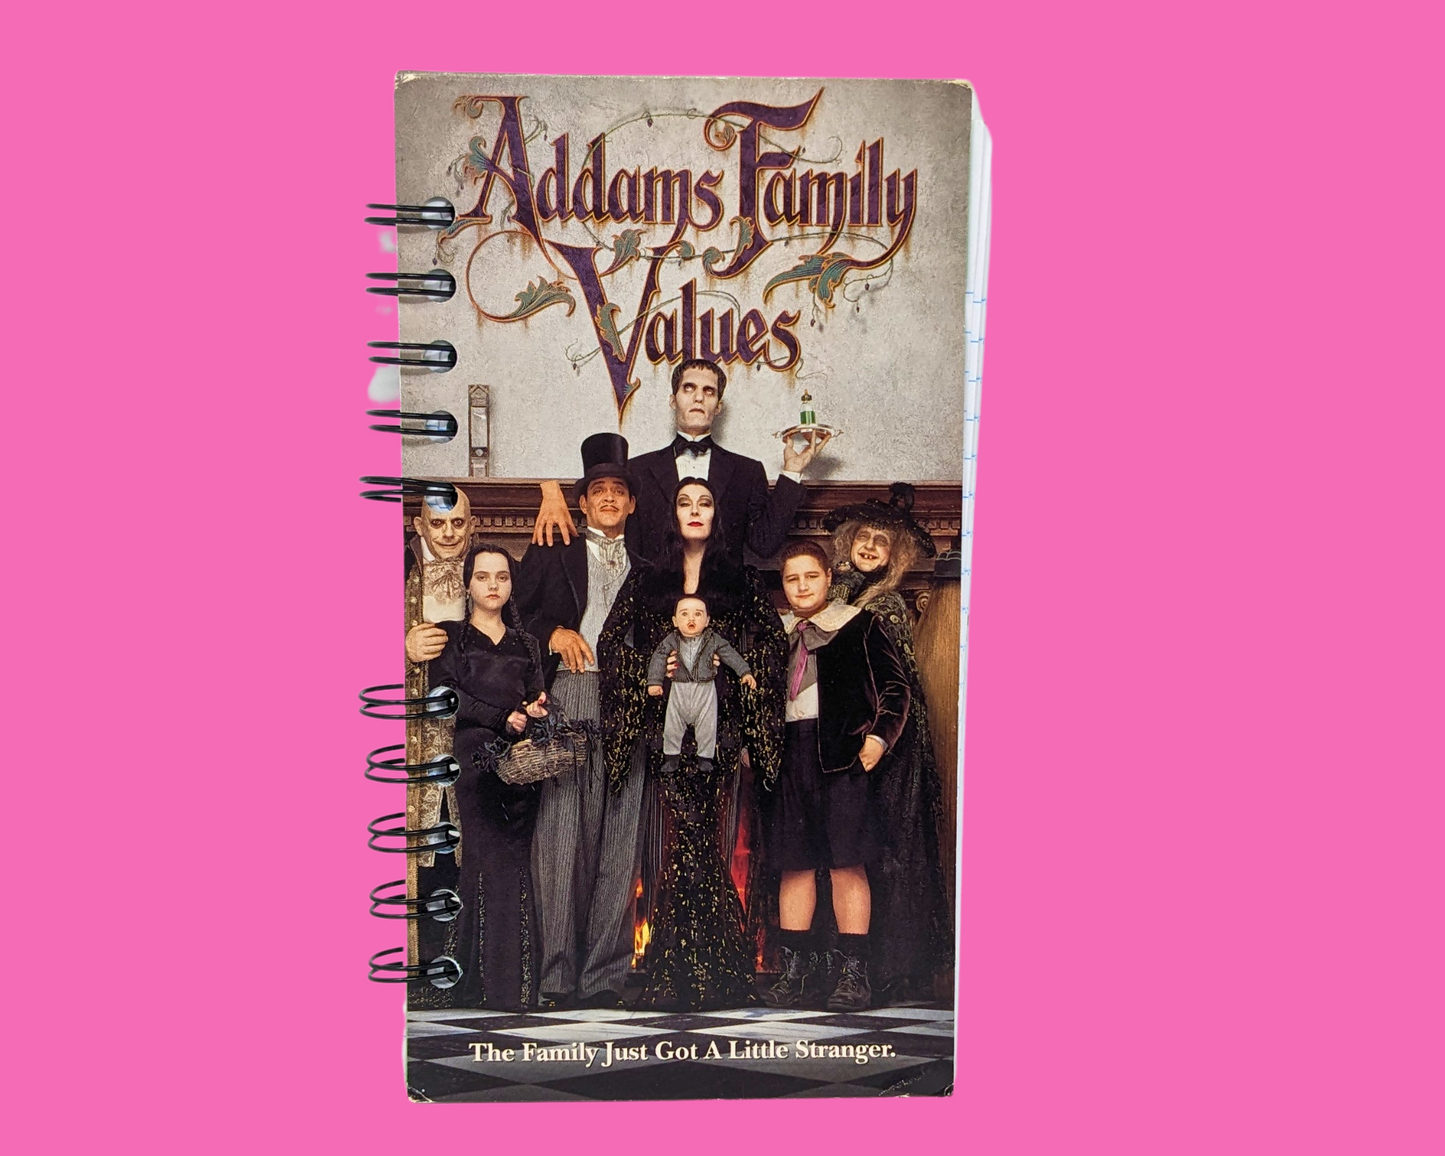 Addams Family Values VHS Movie Notebook